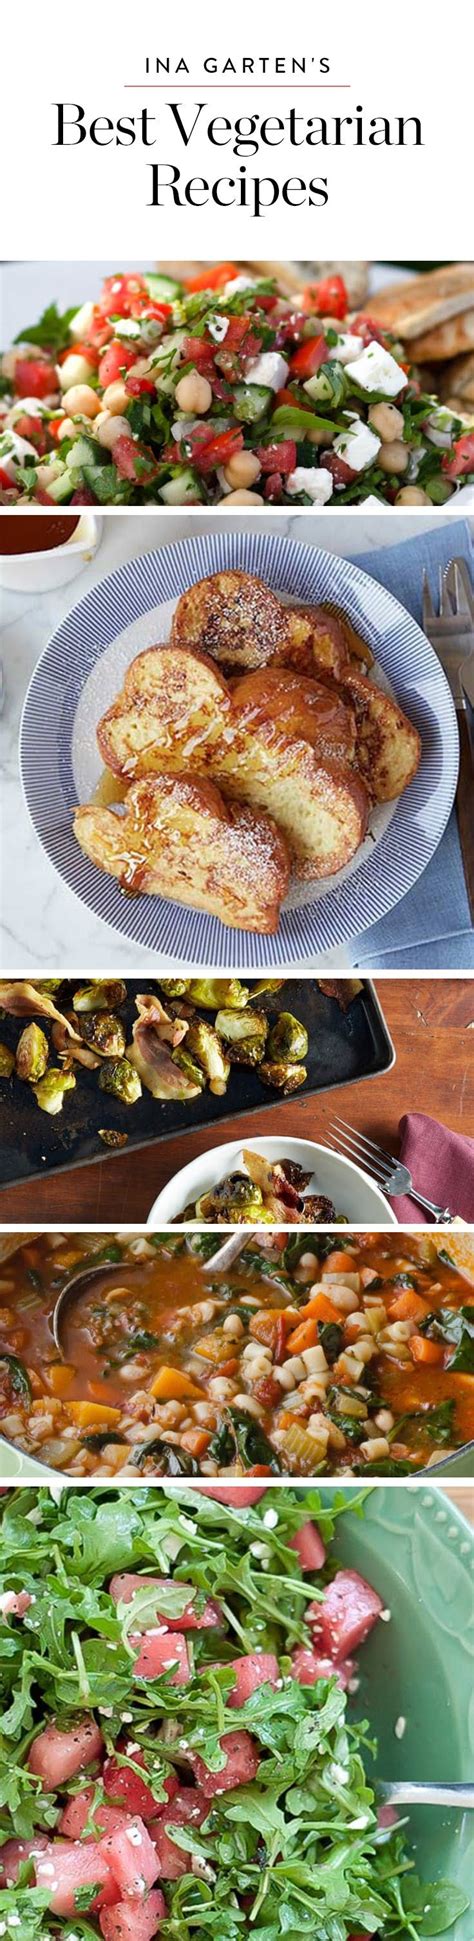 Ina garten's thanksgiving recipes bring your turkey day to the next level — so get ready for the thanksgiving of your dreams! Ina Garten's Most Delicious Vegetarian Recipes Ever ...